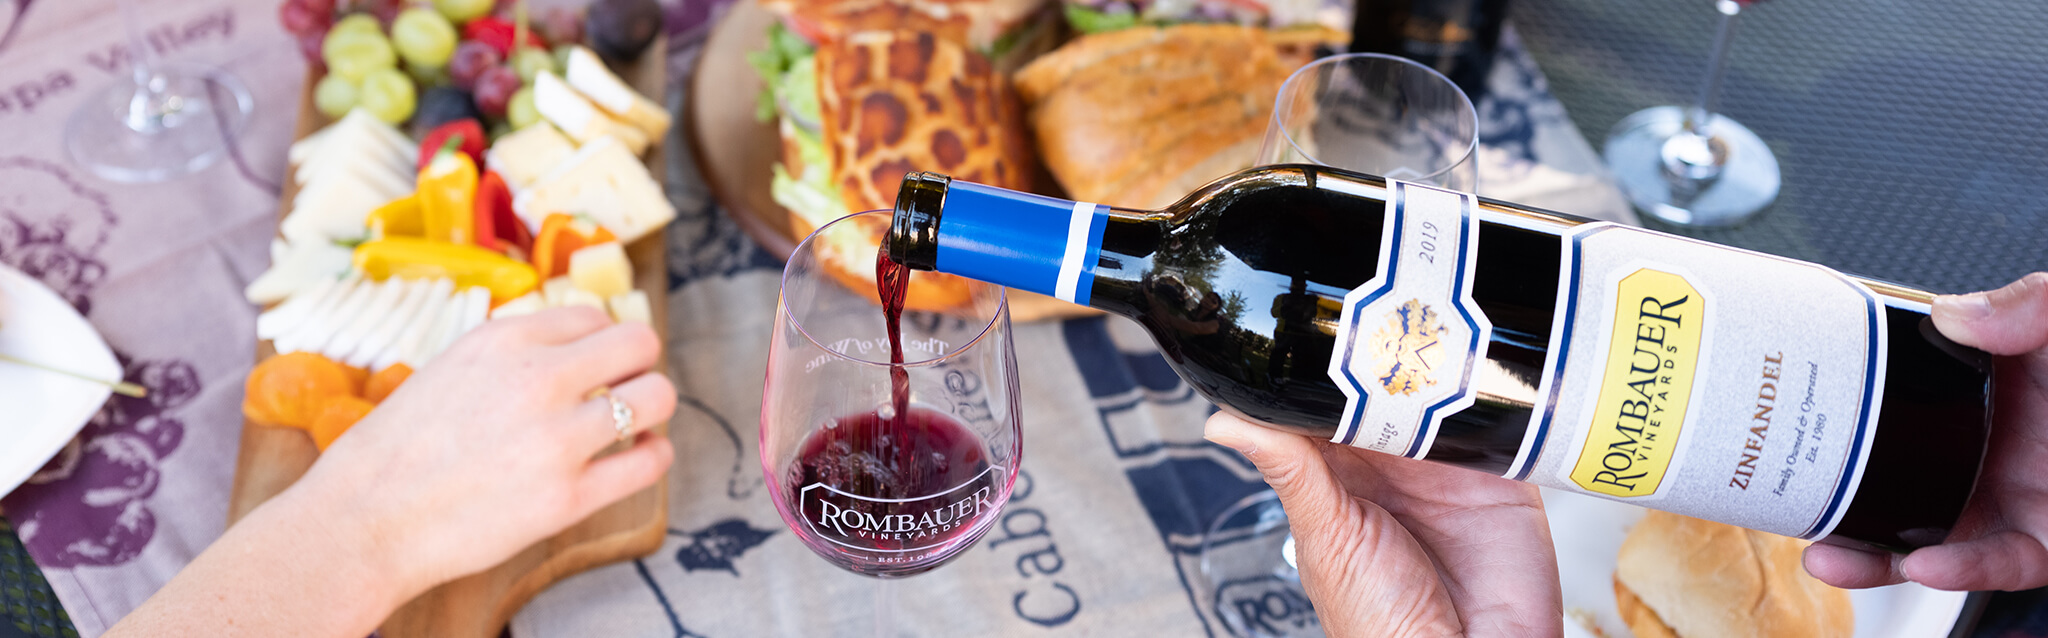 Zinfandel Pouring with Food Behind it